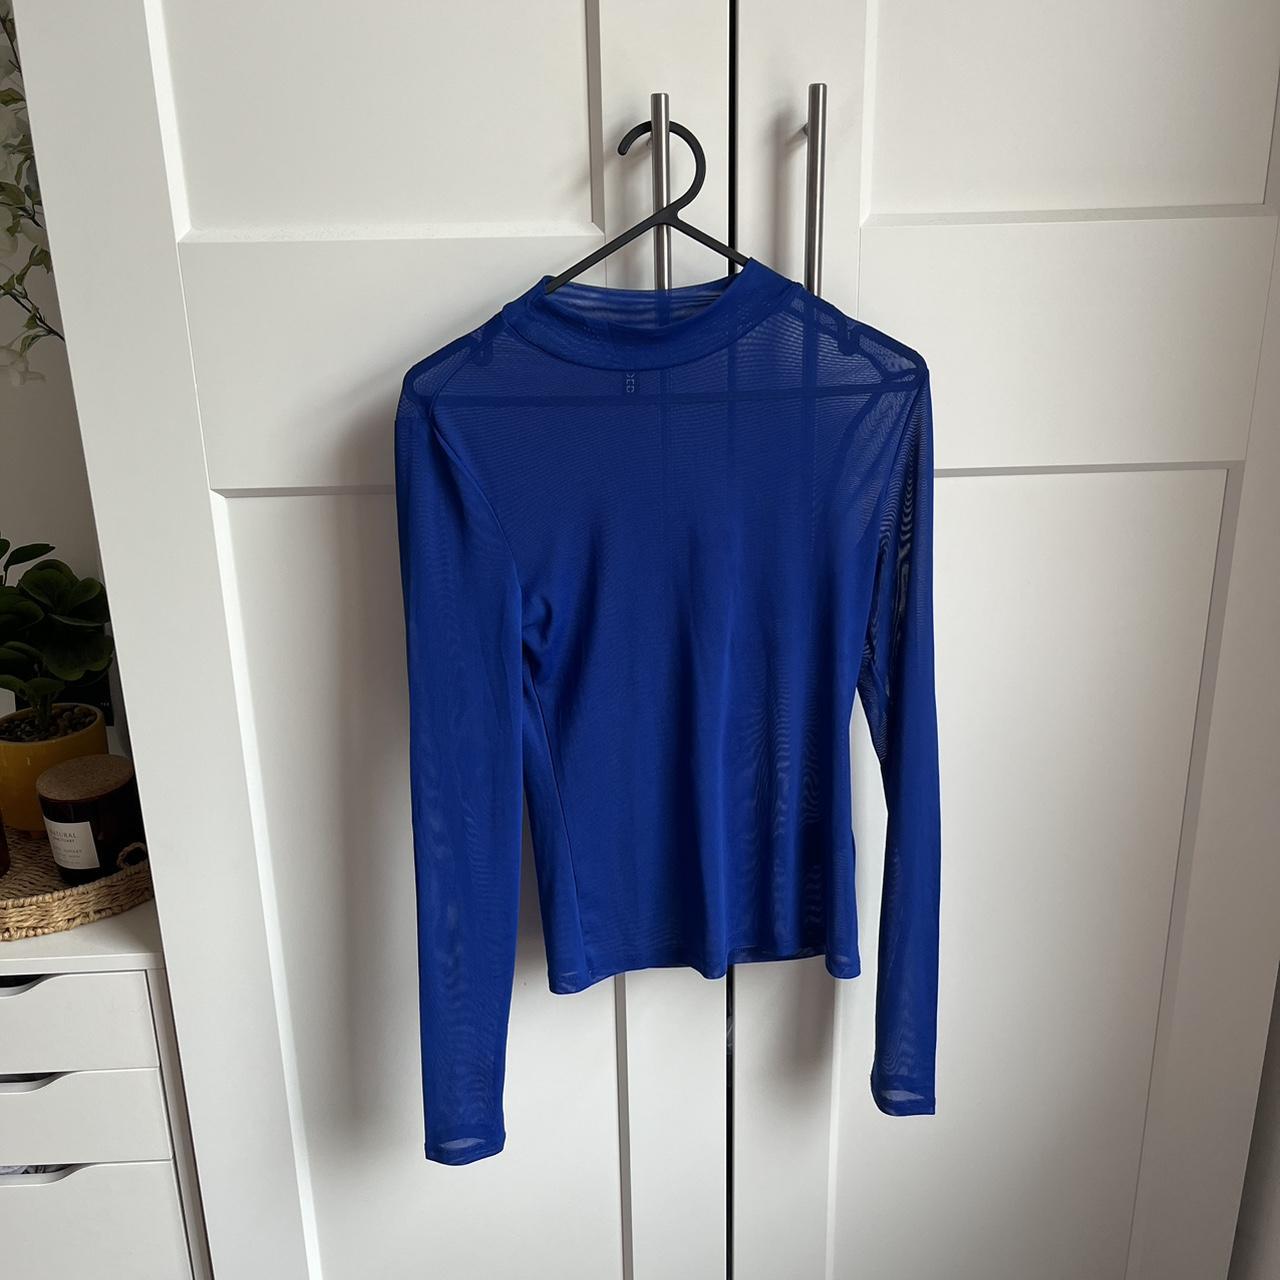 H&M blue mesh high neck top perfect for nights out... - Depop